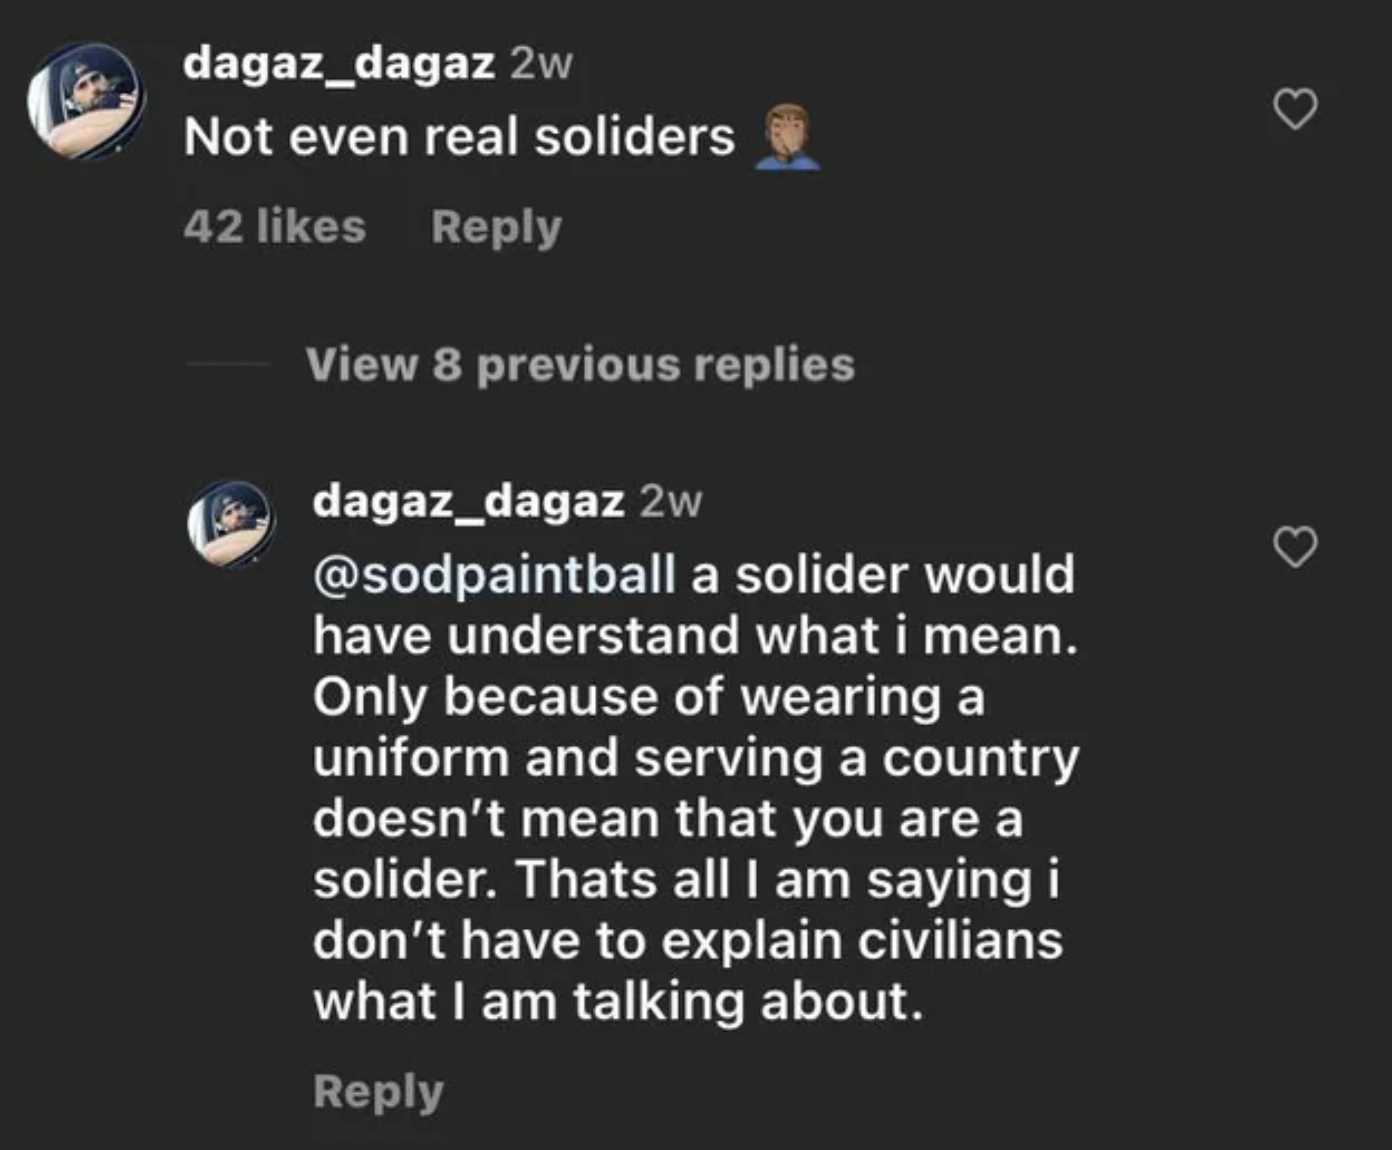 Not even real soliders 42 View 8 previous replies2w a solider would have understand what i mean. Only because of wearing a uniform and serving a country doesn't mean that you are a solider. Thats all I am saying i